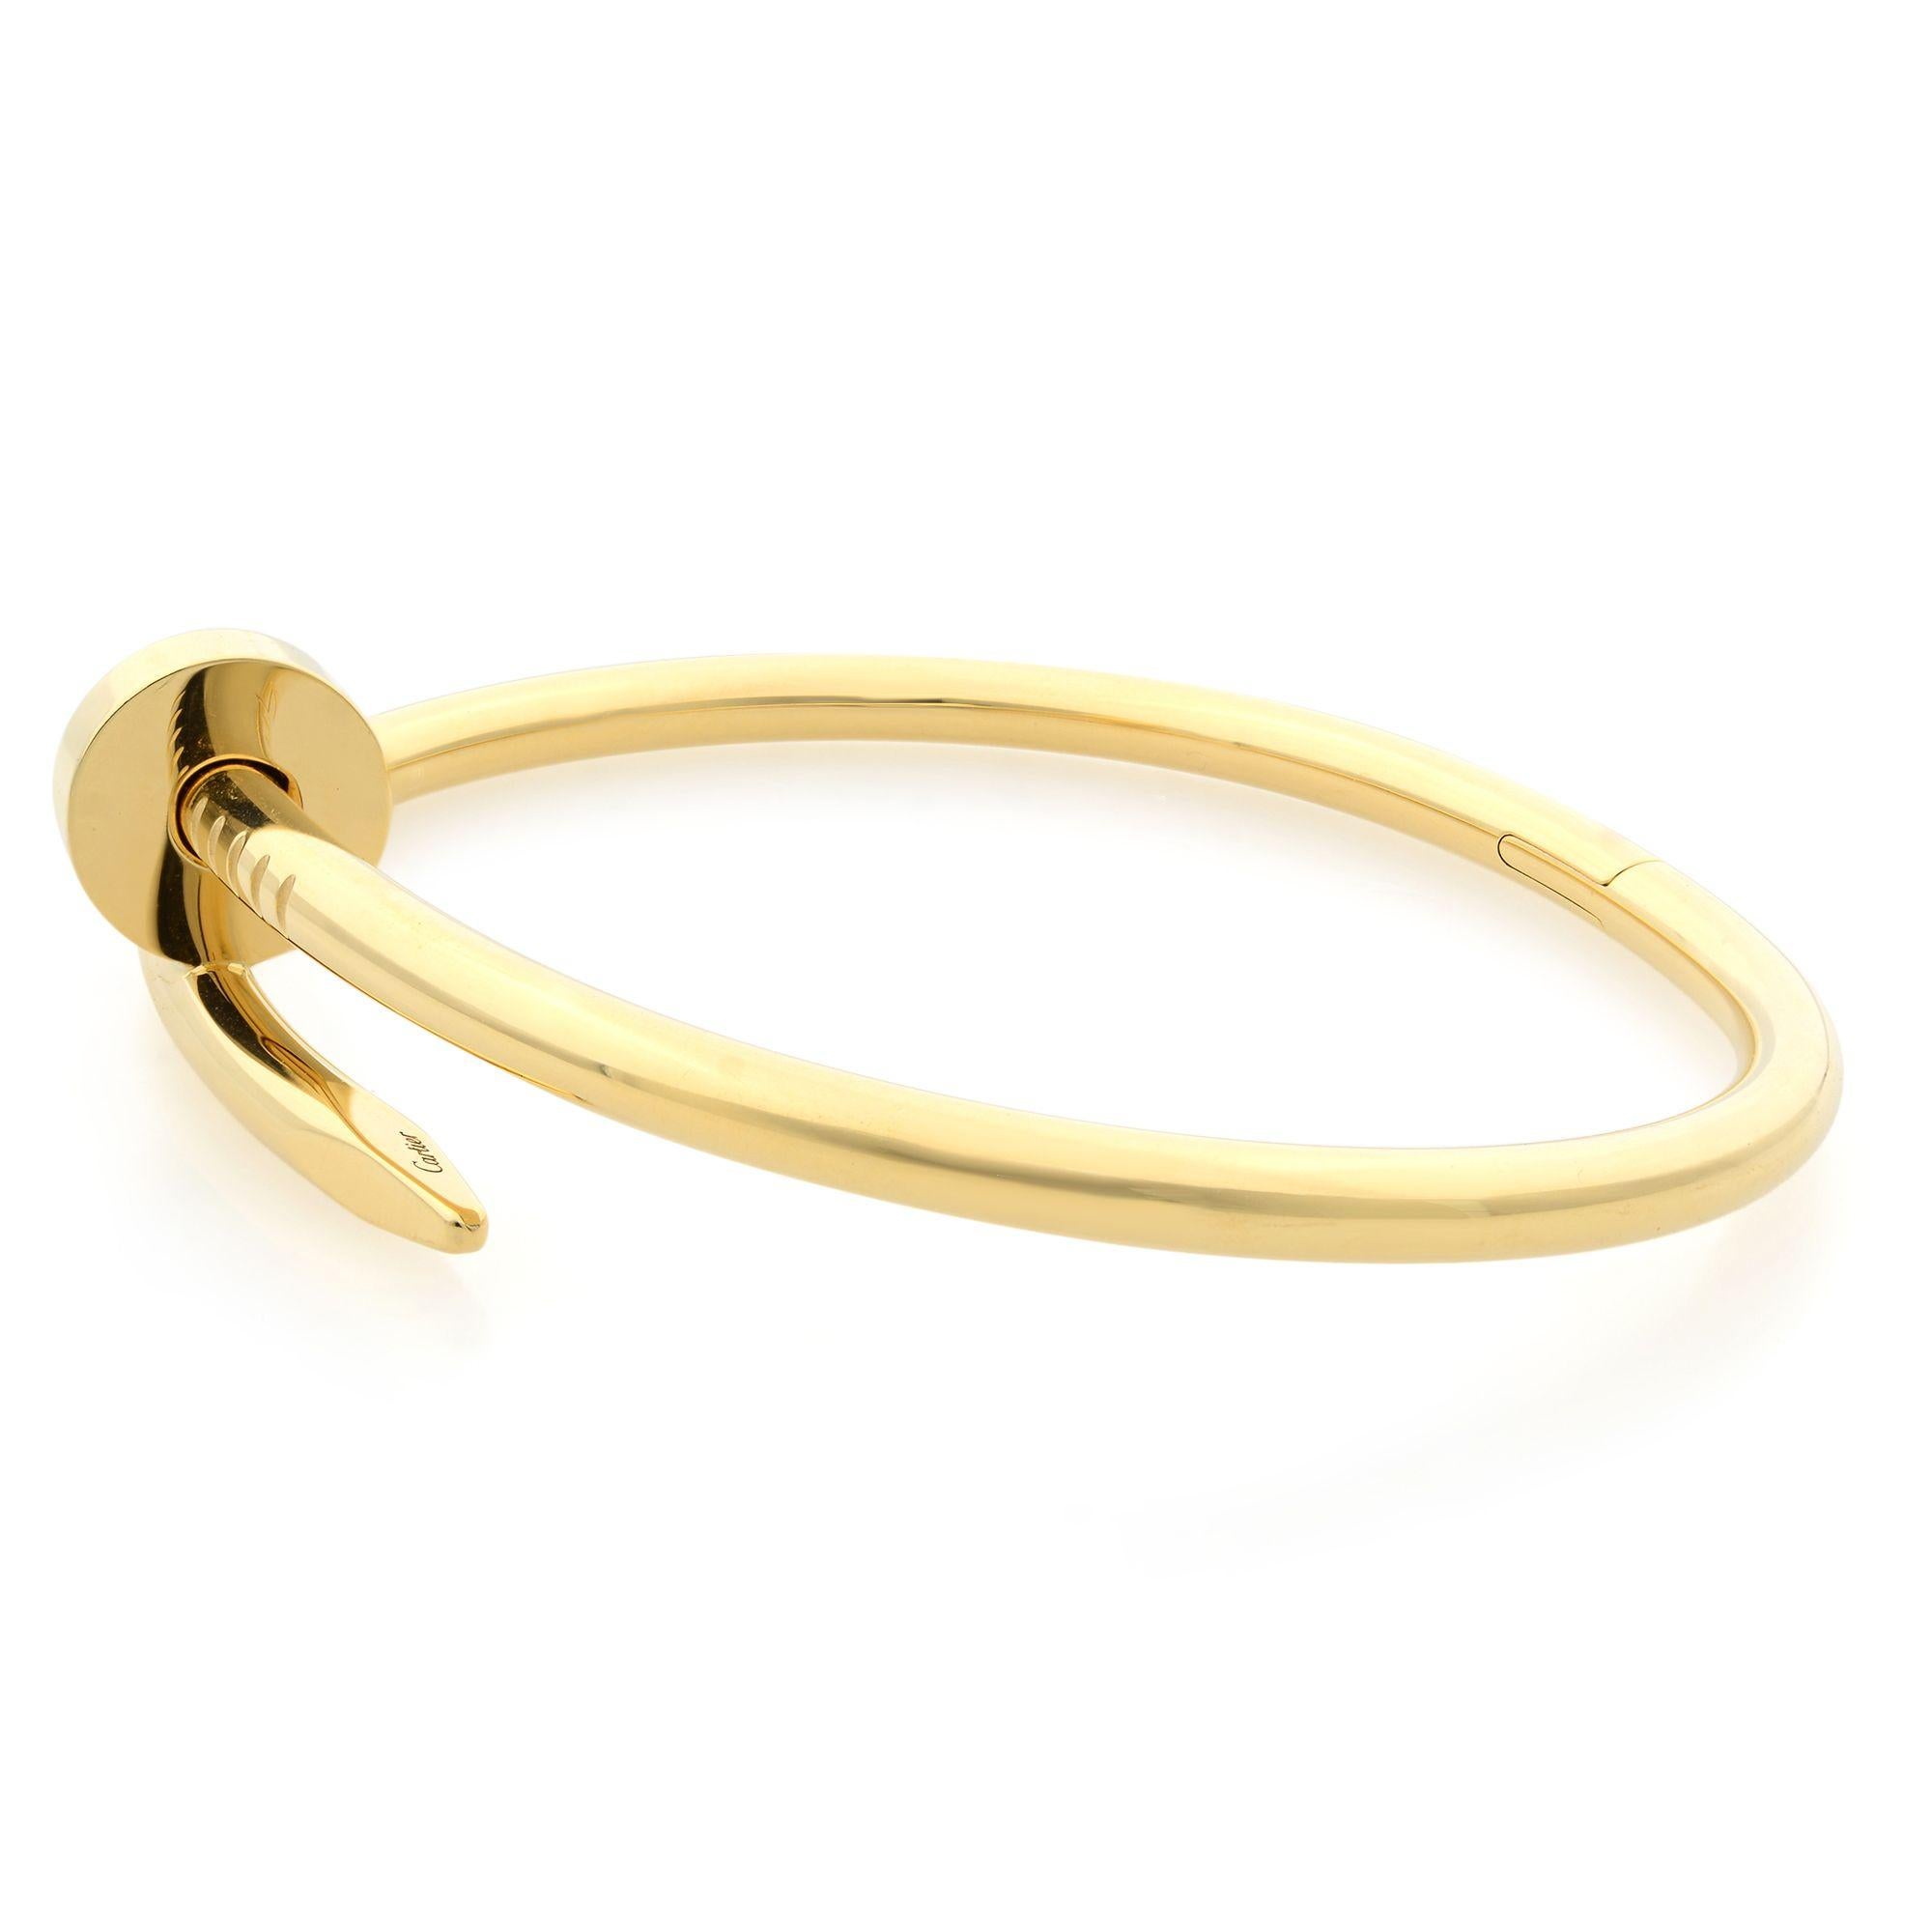 Cartier Juste un Clou bracelet, classic, 18K yellow gold. Width: 3.5mm. Size 17.
Unworn condition, shows no sign of wear. Comes with original box and papers. 

ABOUT THE COLLECTION:
